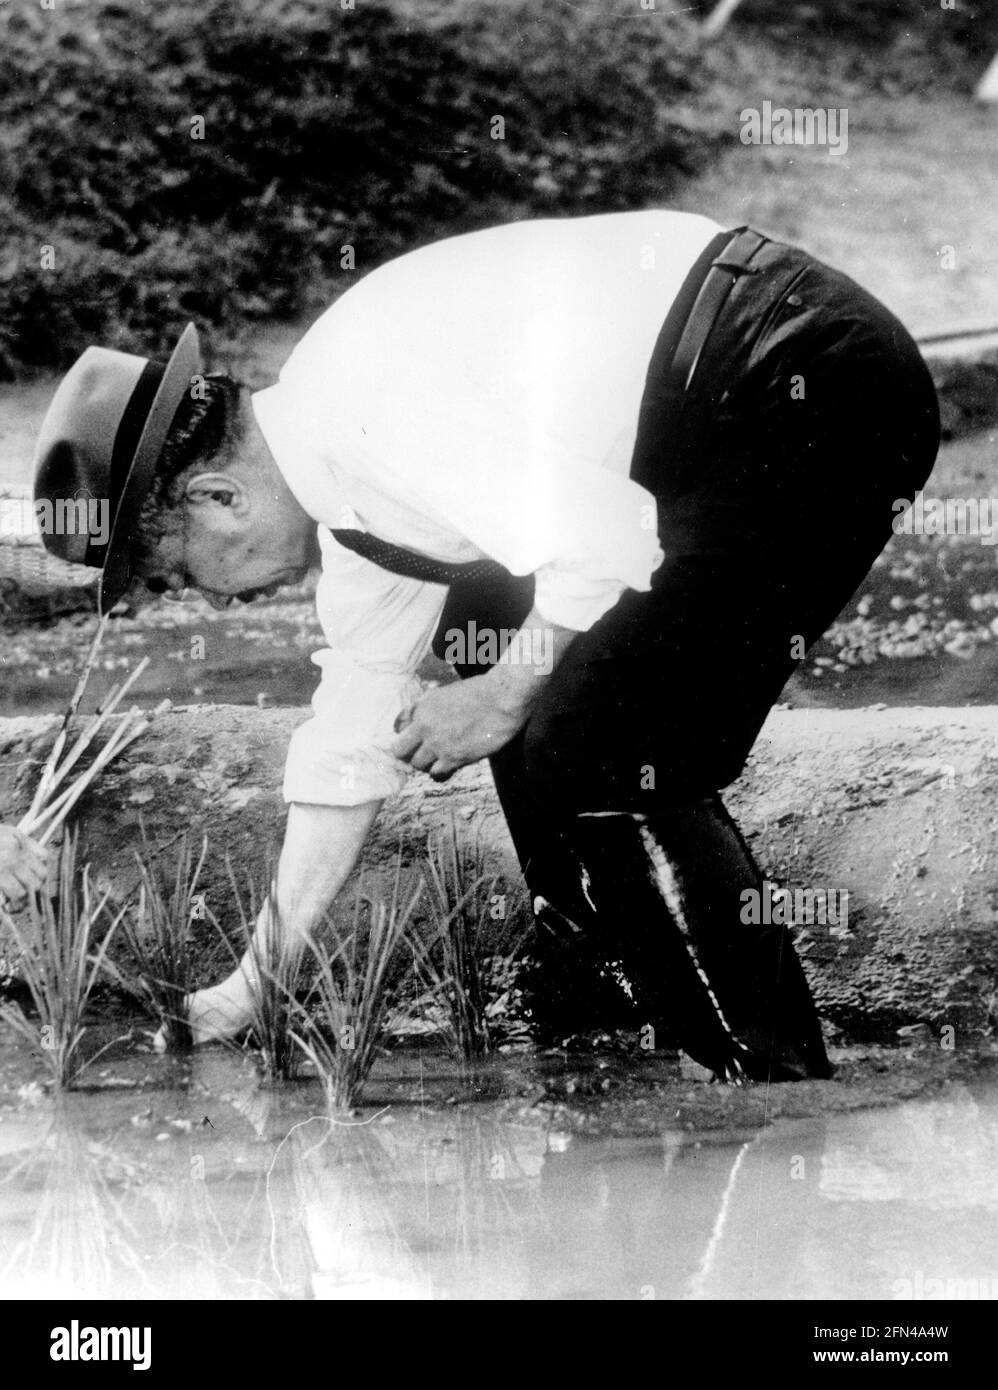 Hirohito, 29.4.1909 - 7.1.1989, Emperor of Japan, planting rice on area of Imperial Palace, Tokyo, ADDITIONAL-RIGHTS-CLEARANCE-INFO-NOT-AVAILABLE Stock Photo